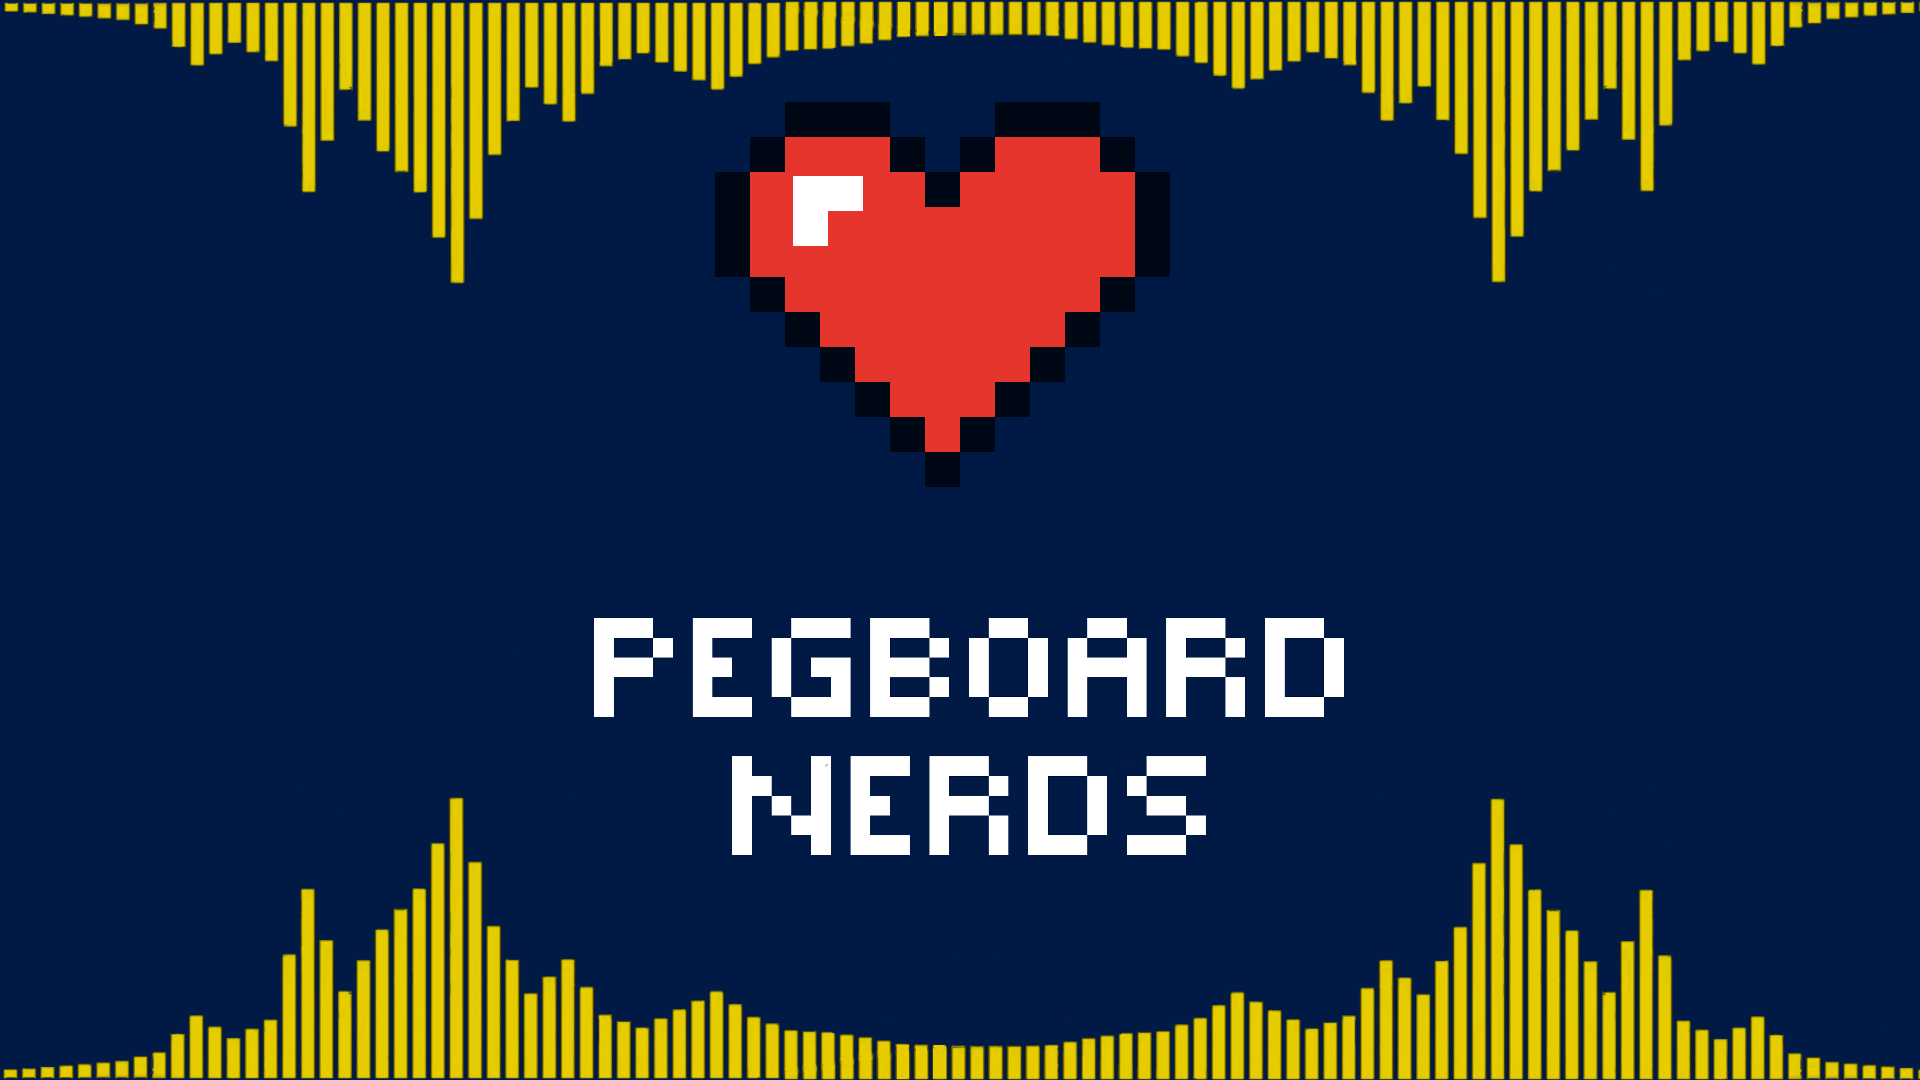 1920x1080 Does anyone have a good 7md or Pegboard Nerds wallpaper? : r/Monstercat